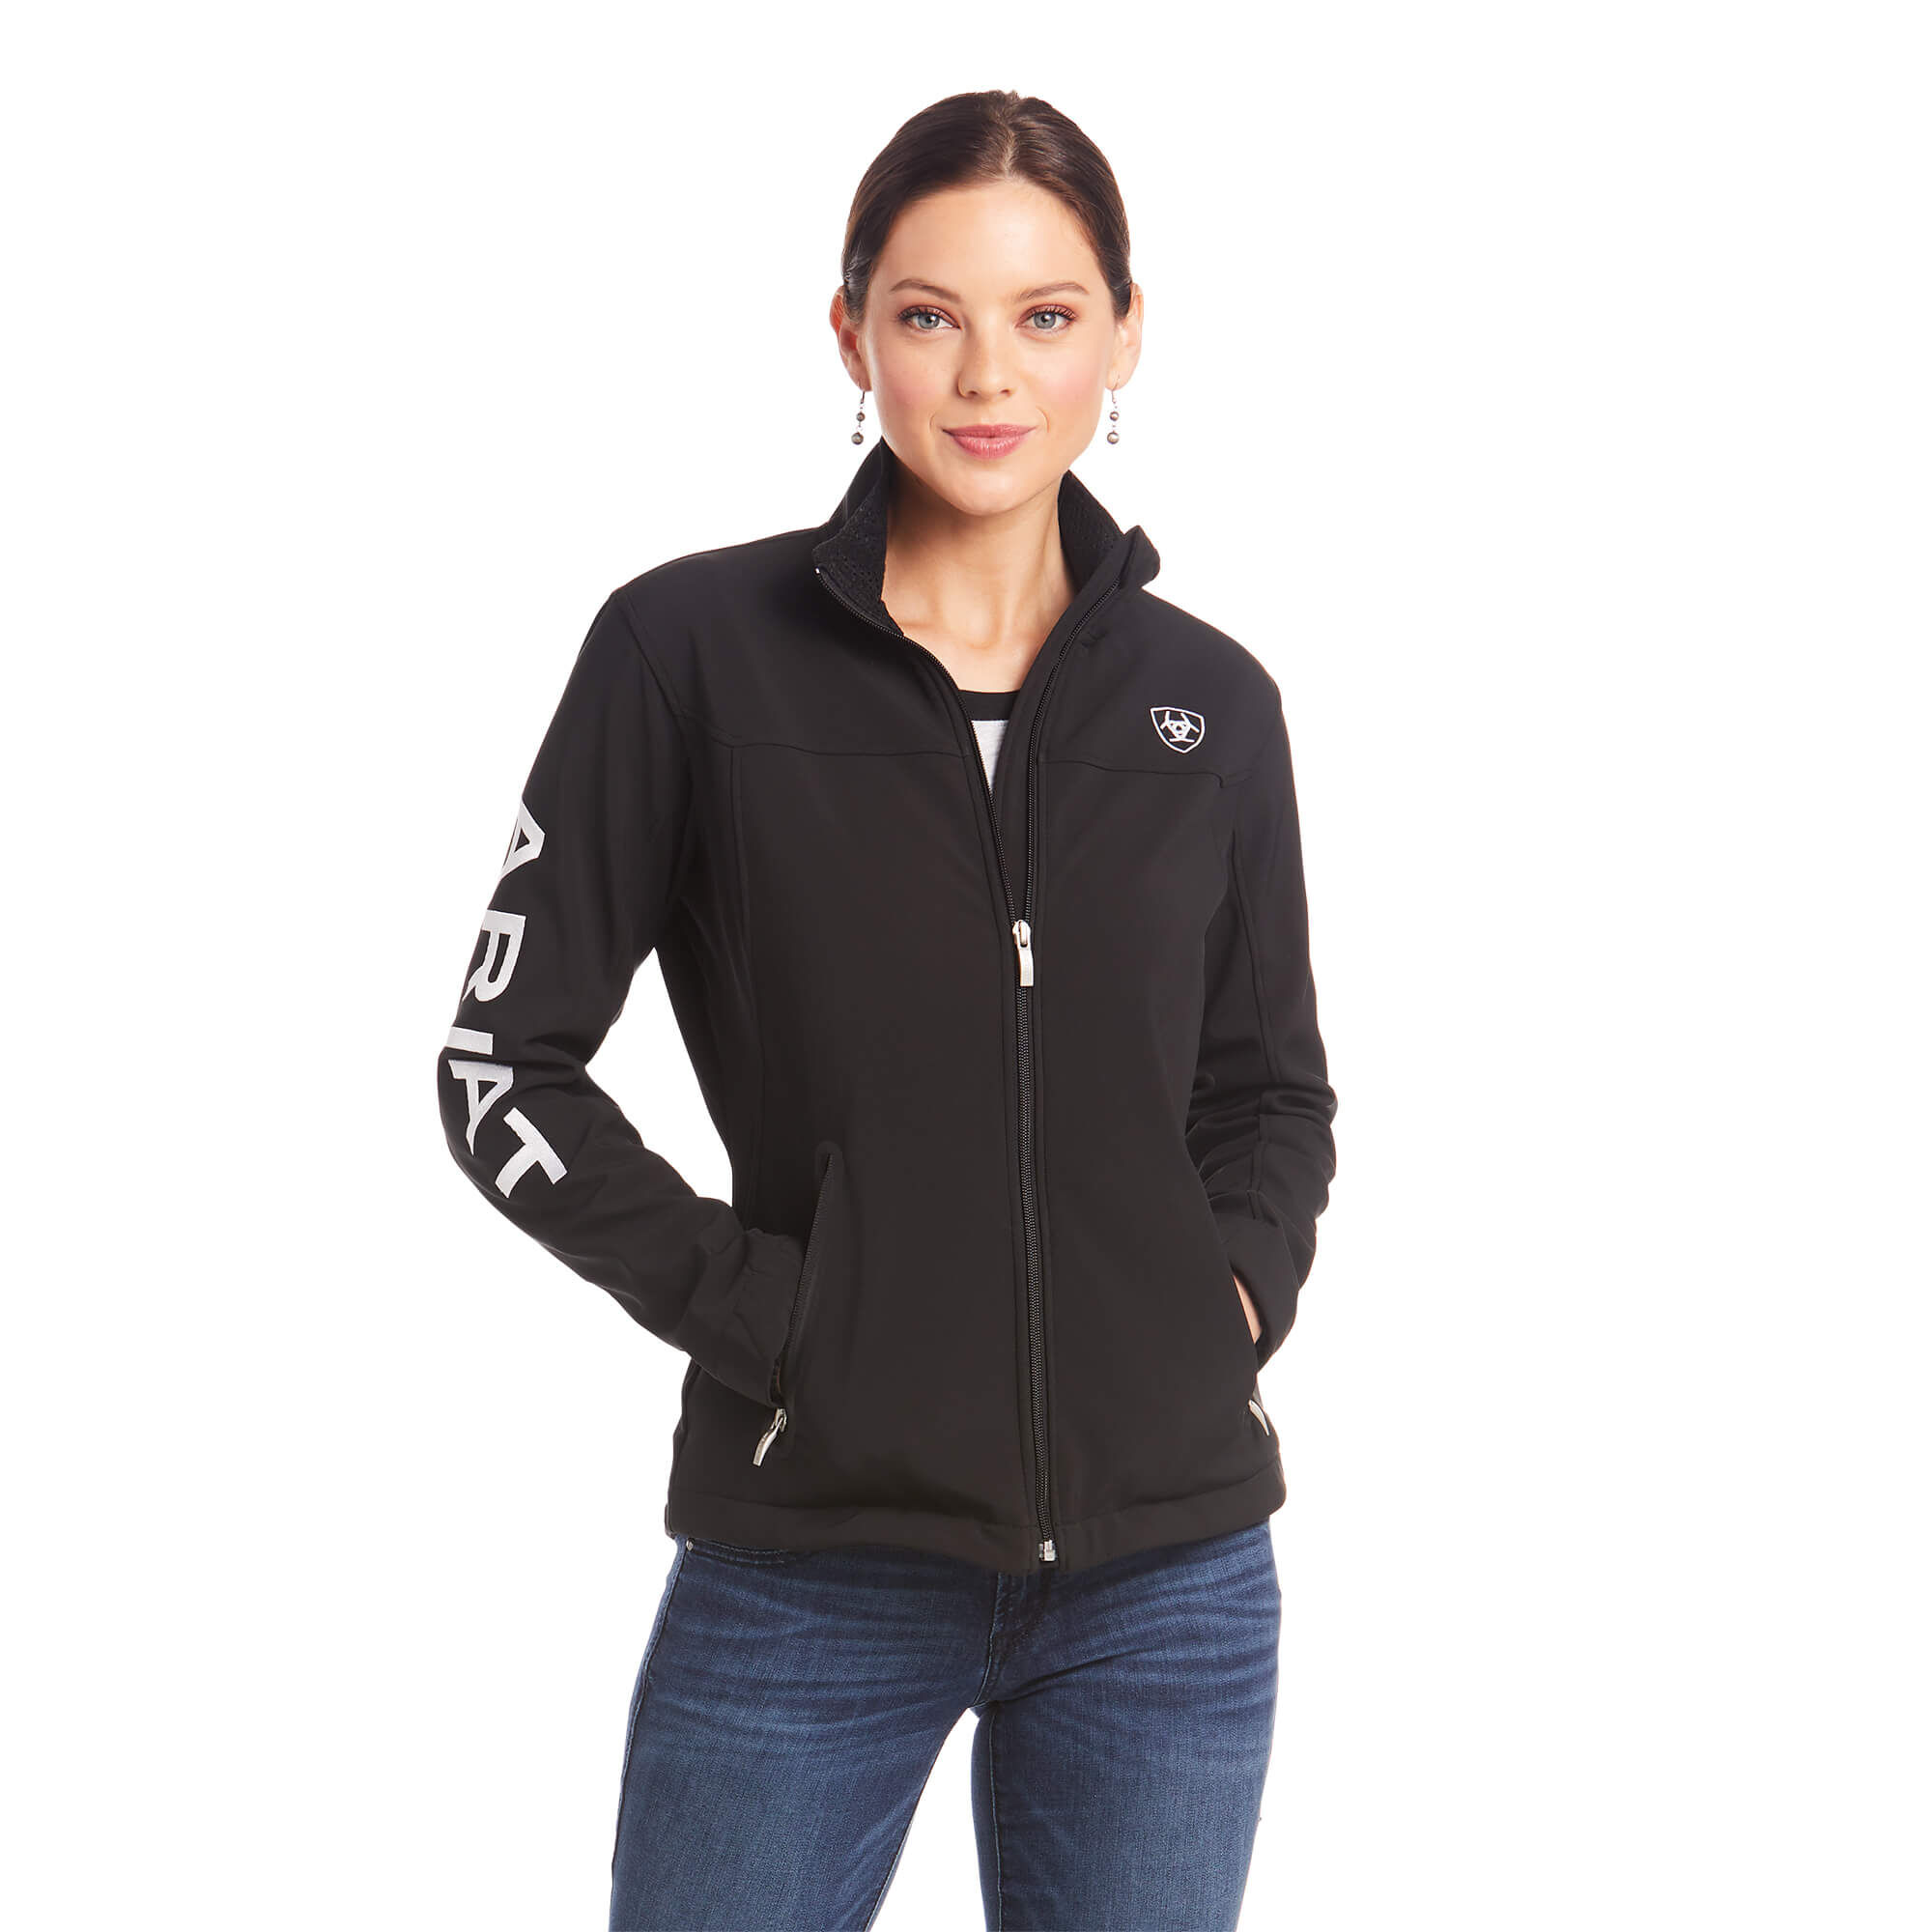 Ariat New Team Softshell Jacket Women’s Wind and Water Resistant Jacket 